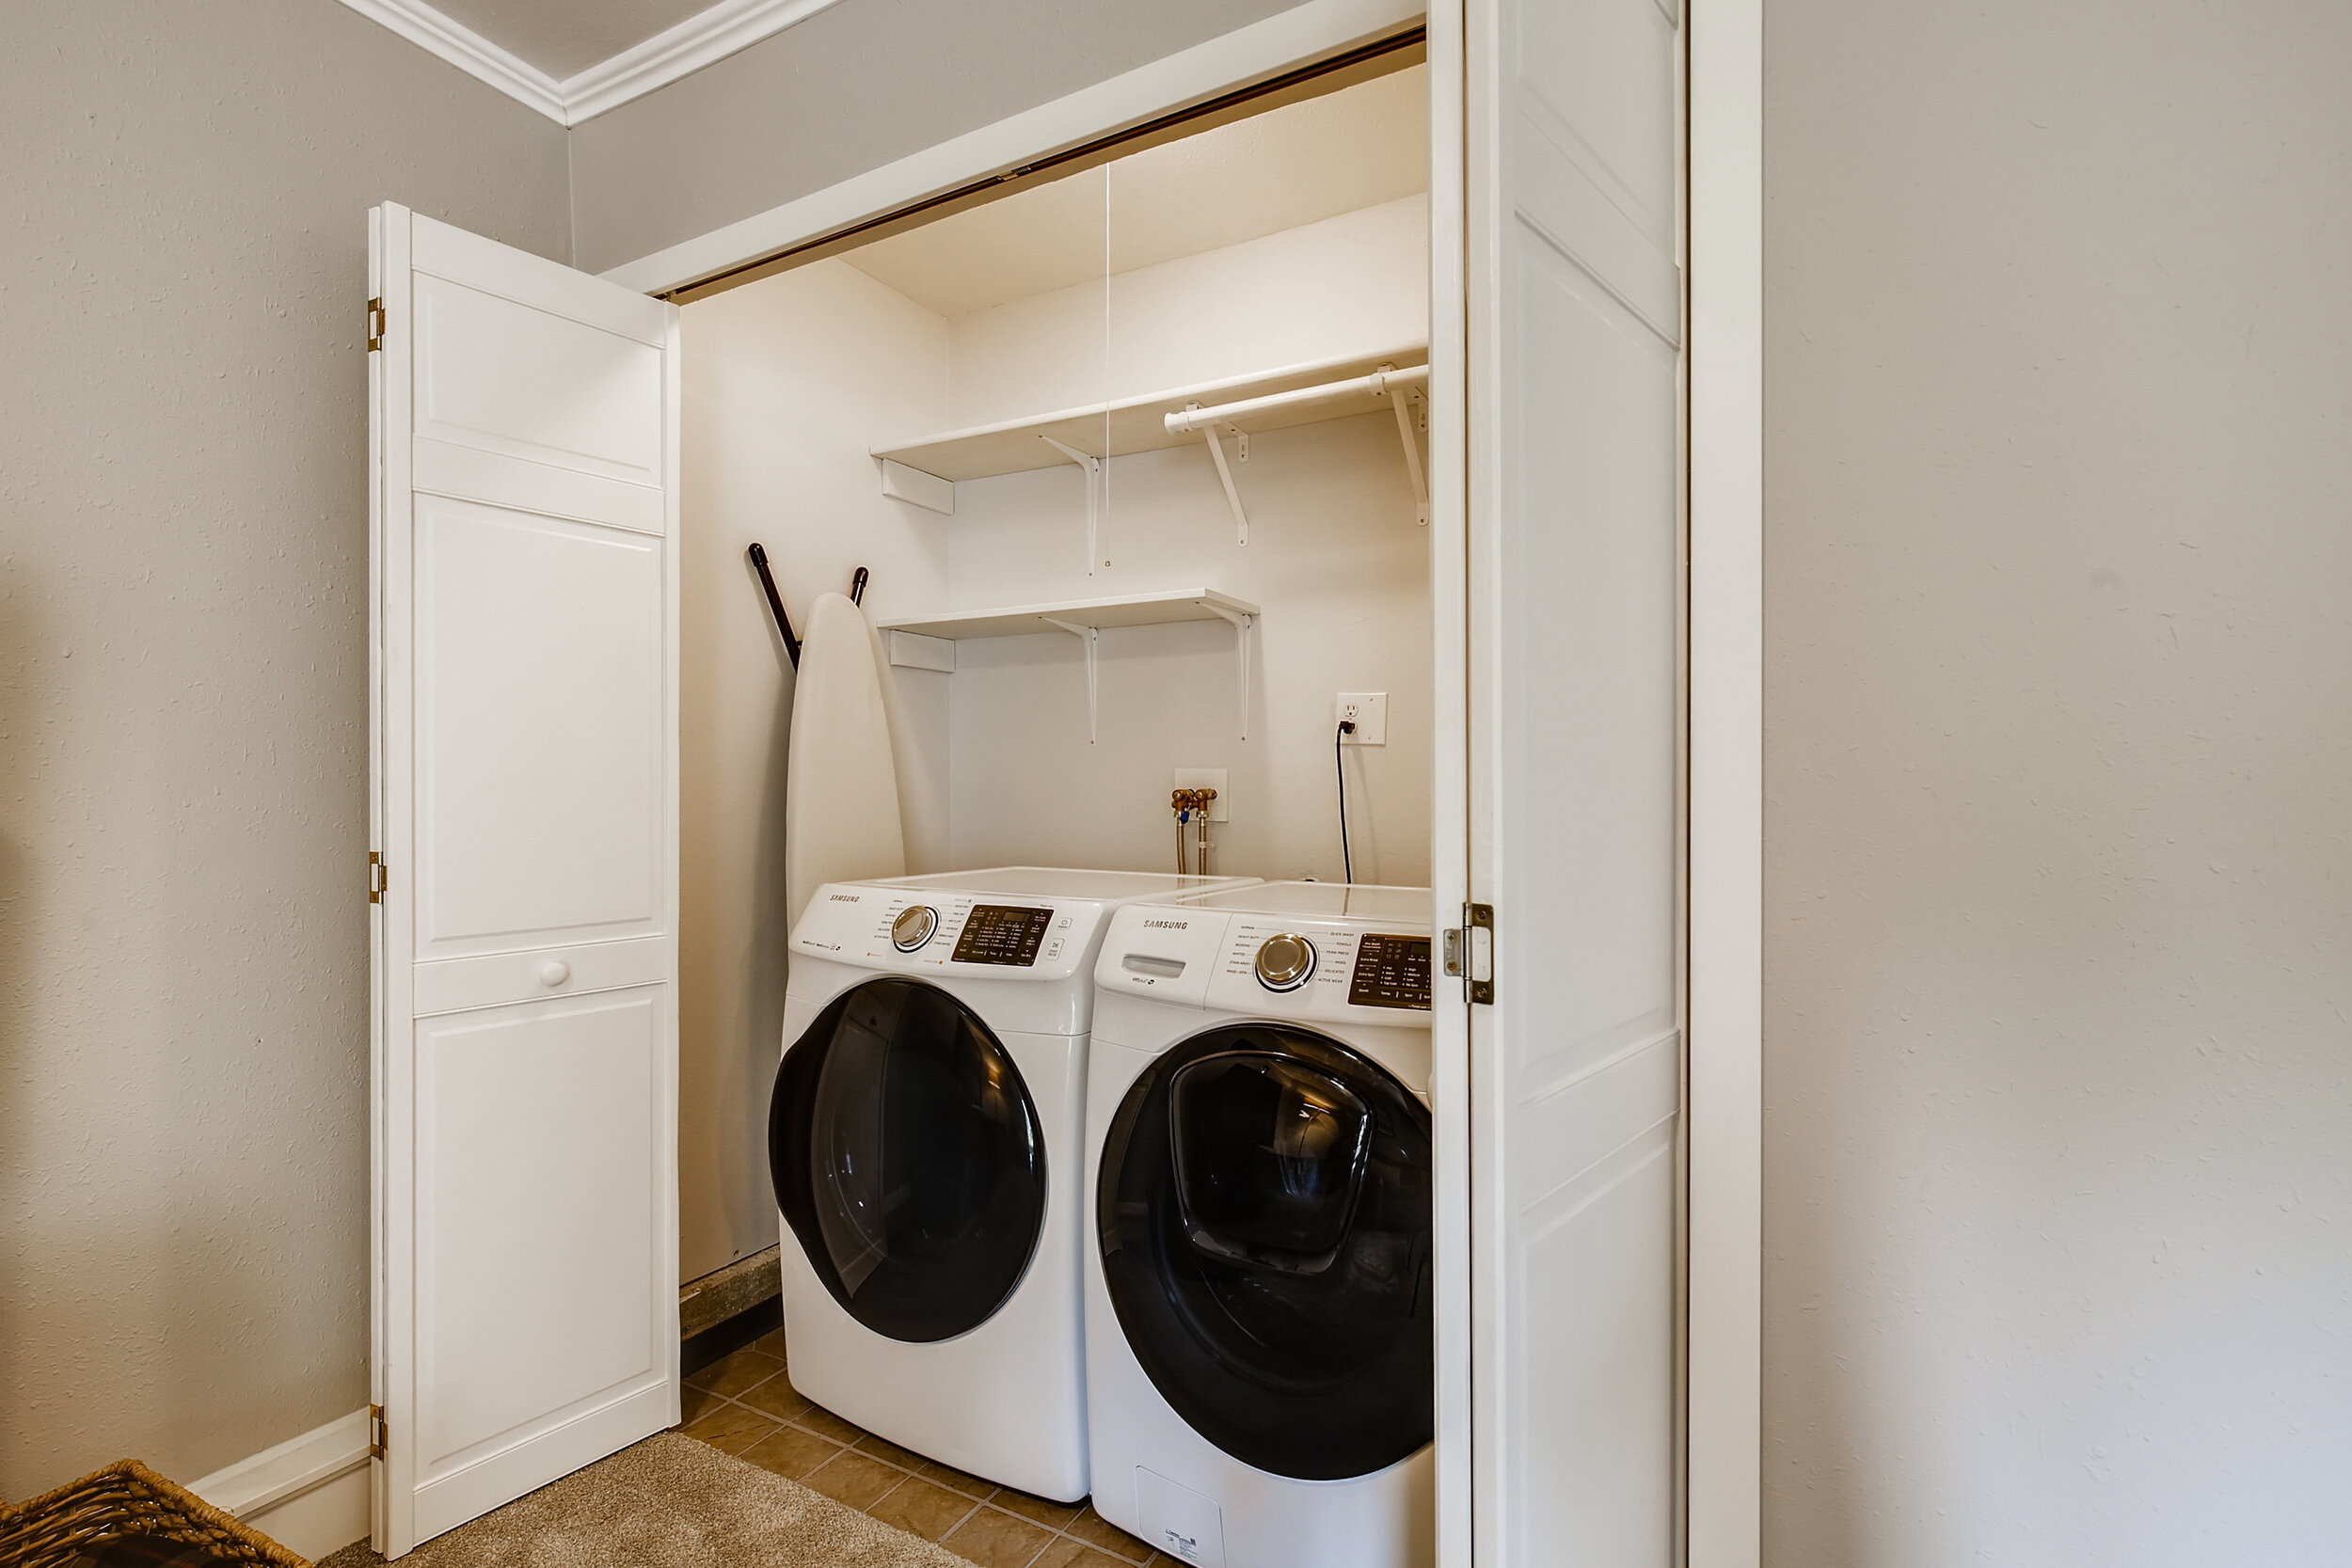 21604 9th Ave W Bothell WA - Print Quality - 030 - 36 Lower Level Laundry Room.jpg